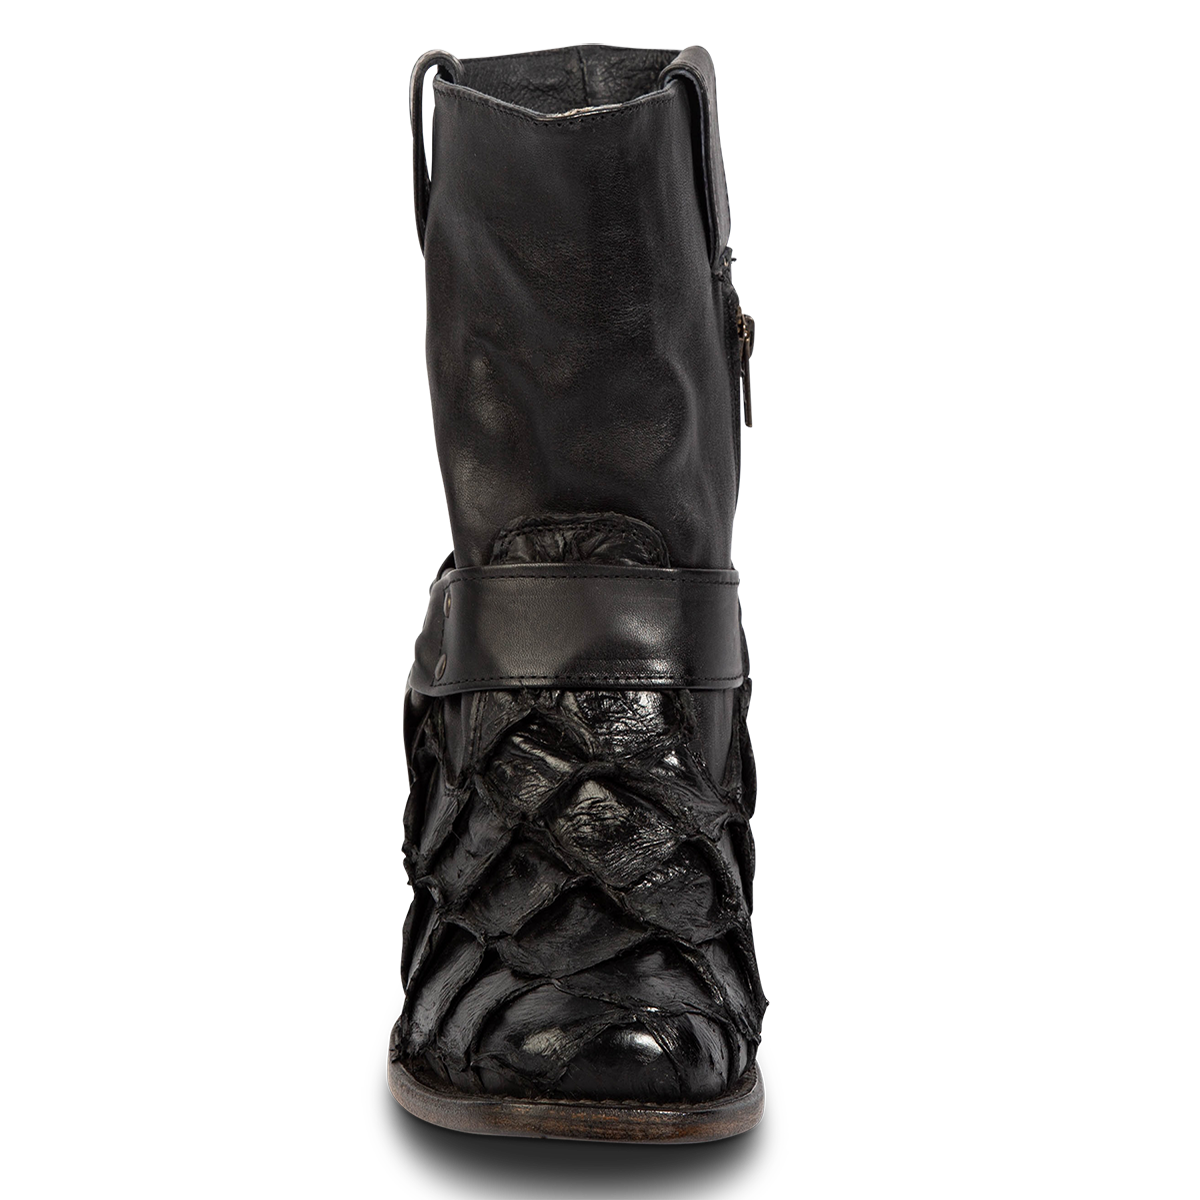 Front view showing FREEBIRD women's Darcy black fish leather boot with a studded ankle harness, leather pull straps, an inside zip closure and a square toe